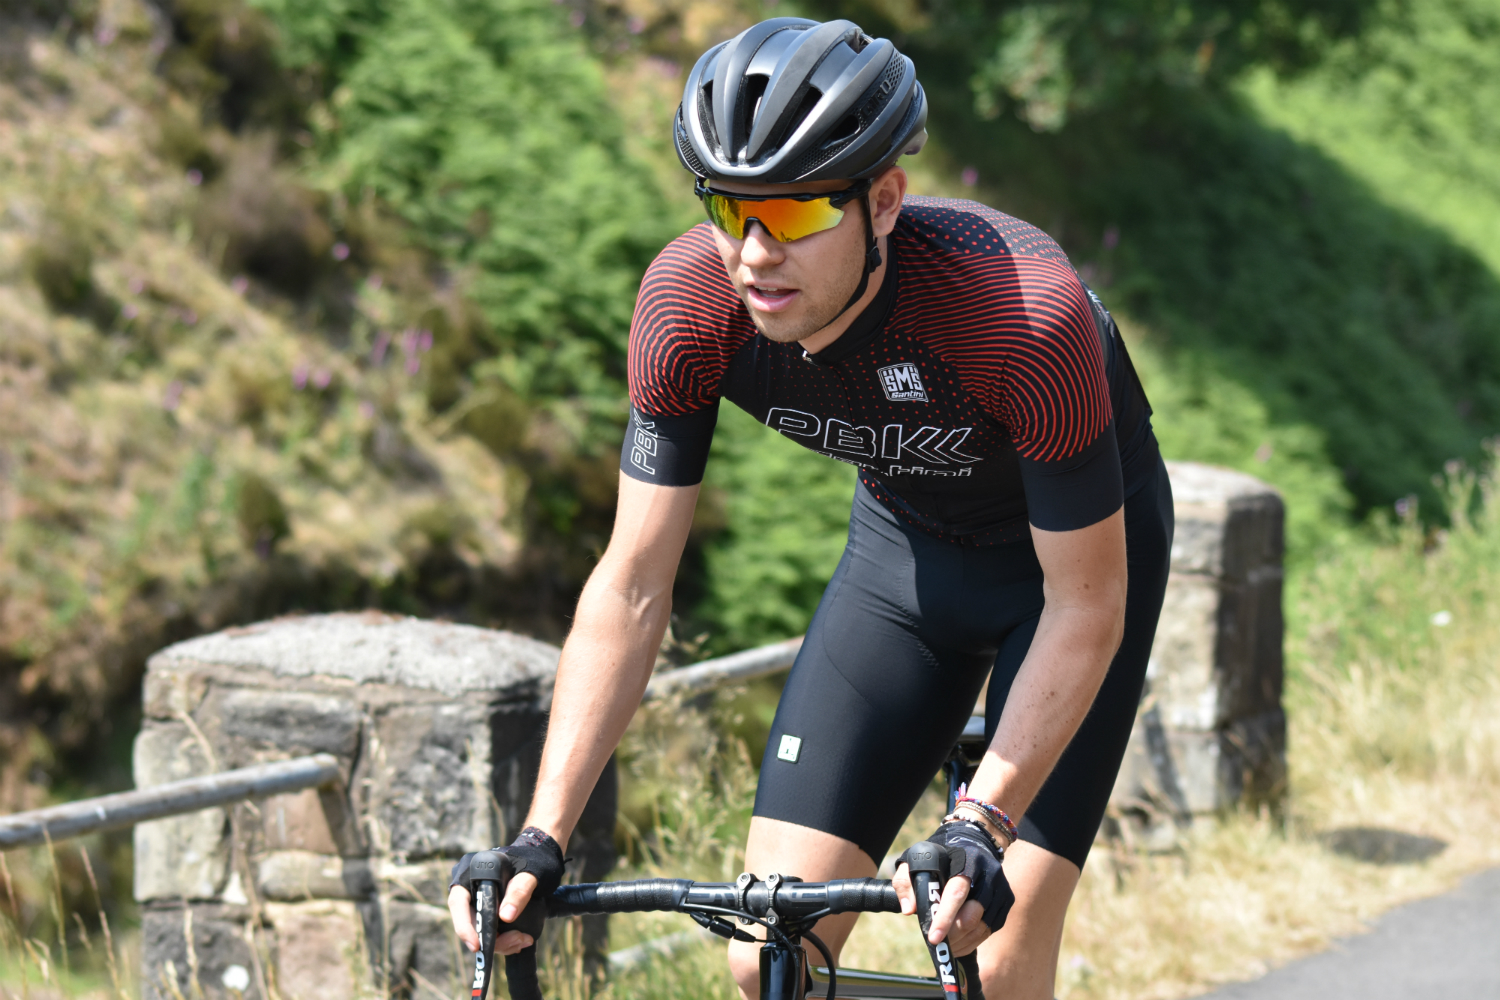 a cycling riding uphill on the huds in the pbk santini clothing collection